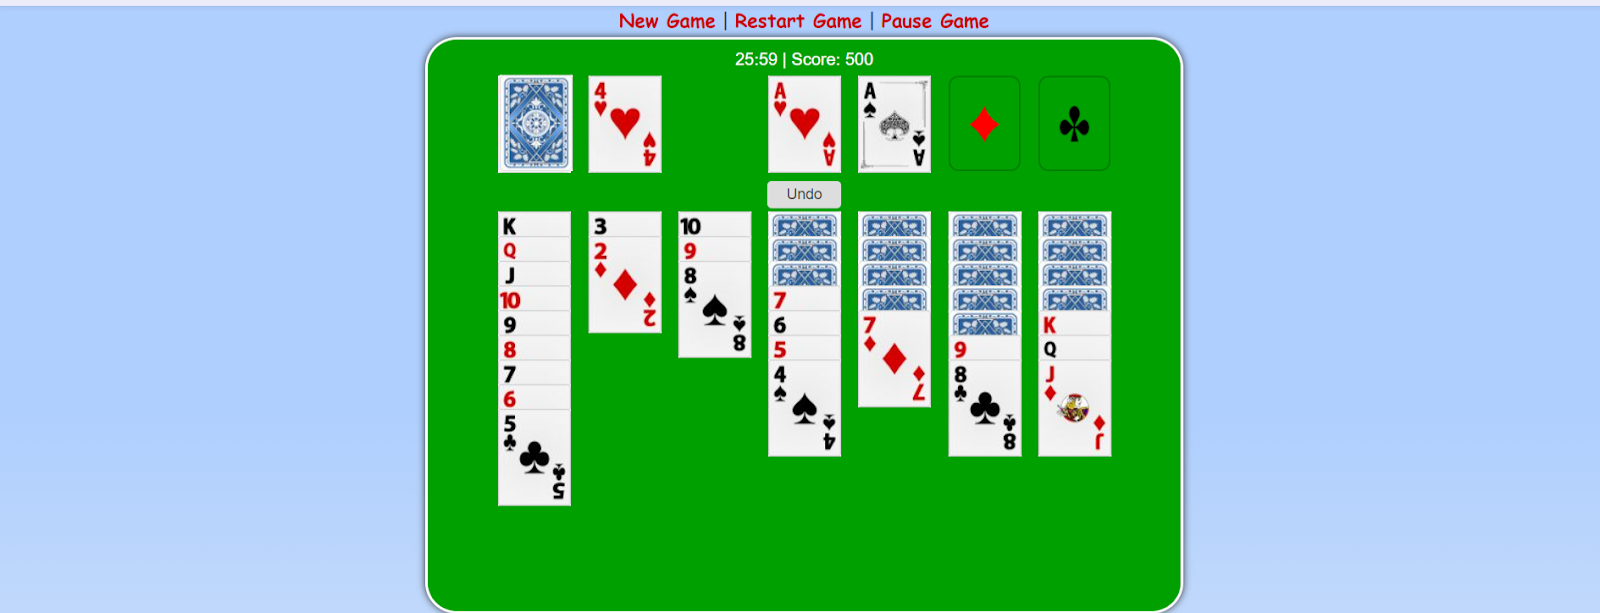 Win at the Game of Solitr online